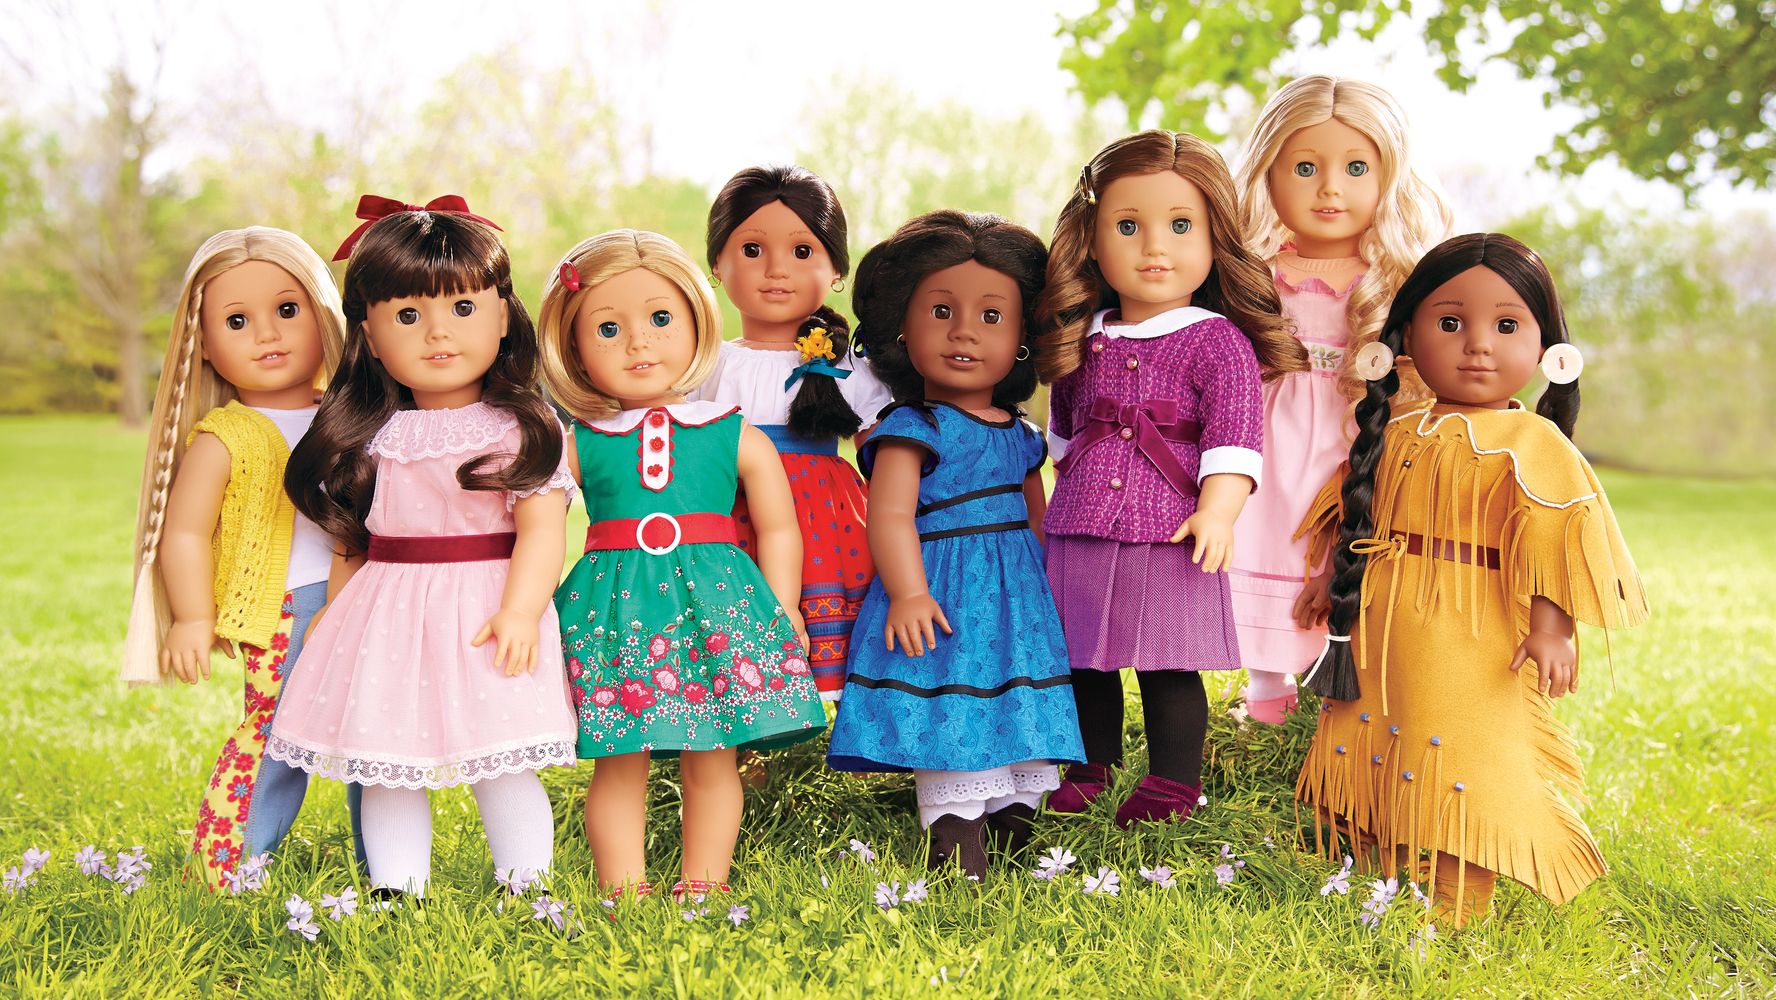 American Girl dolls promote empowerment, at $115 a pop